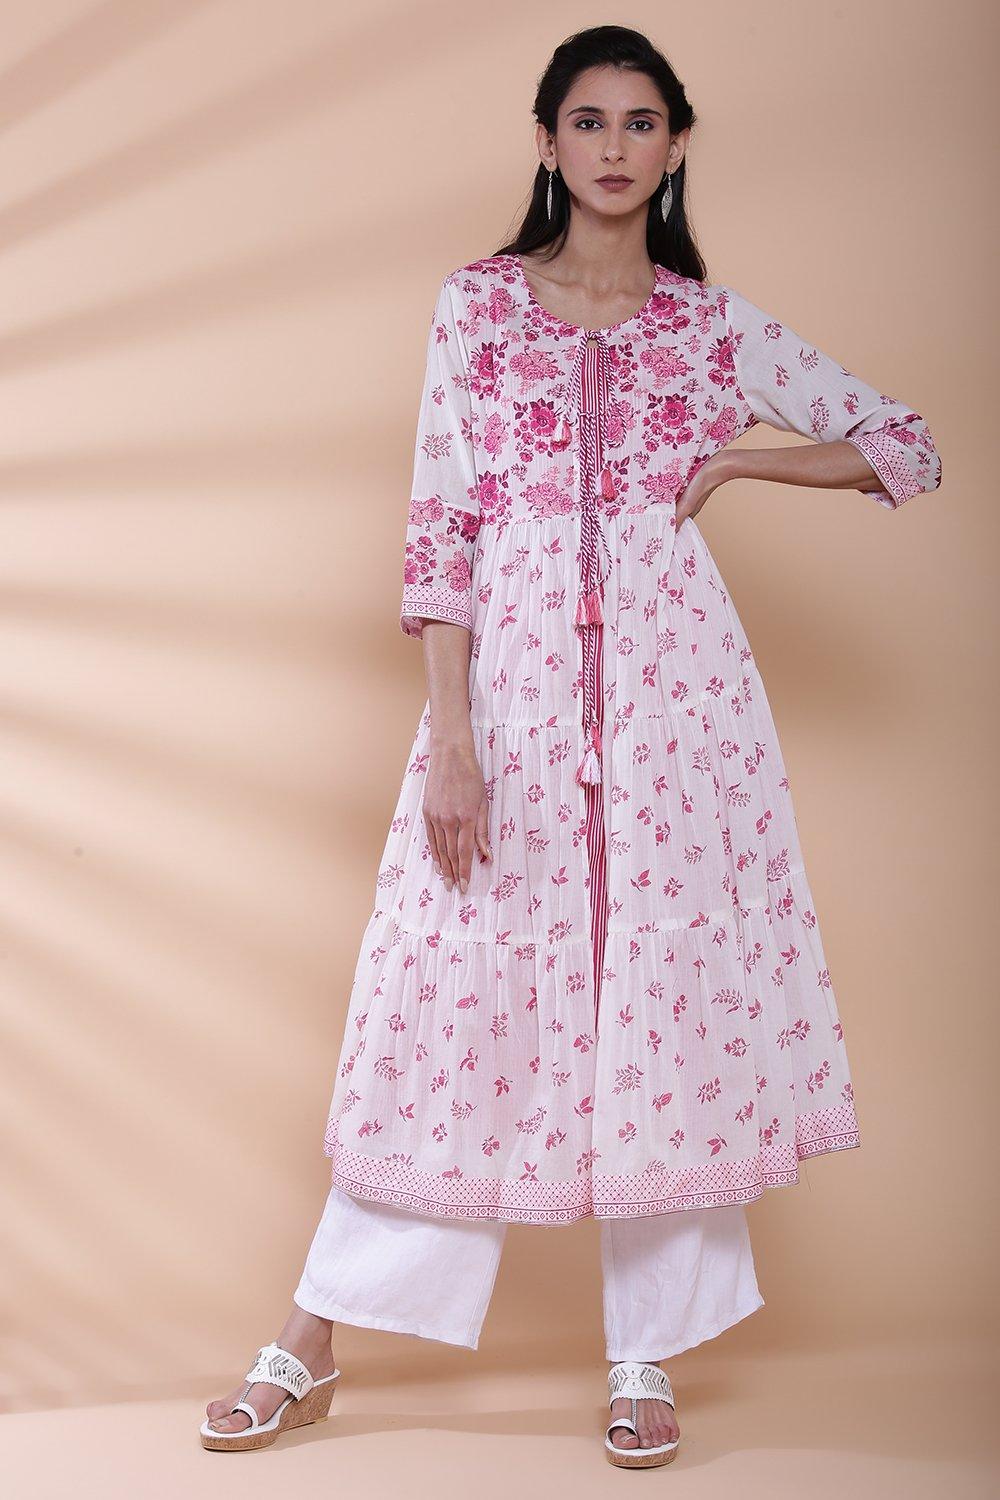 Buy Online White And Pink Cotton Kurta for Women & Girls at Best Prices ...